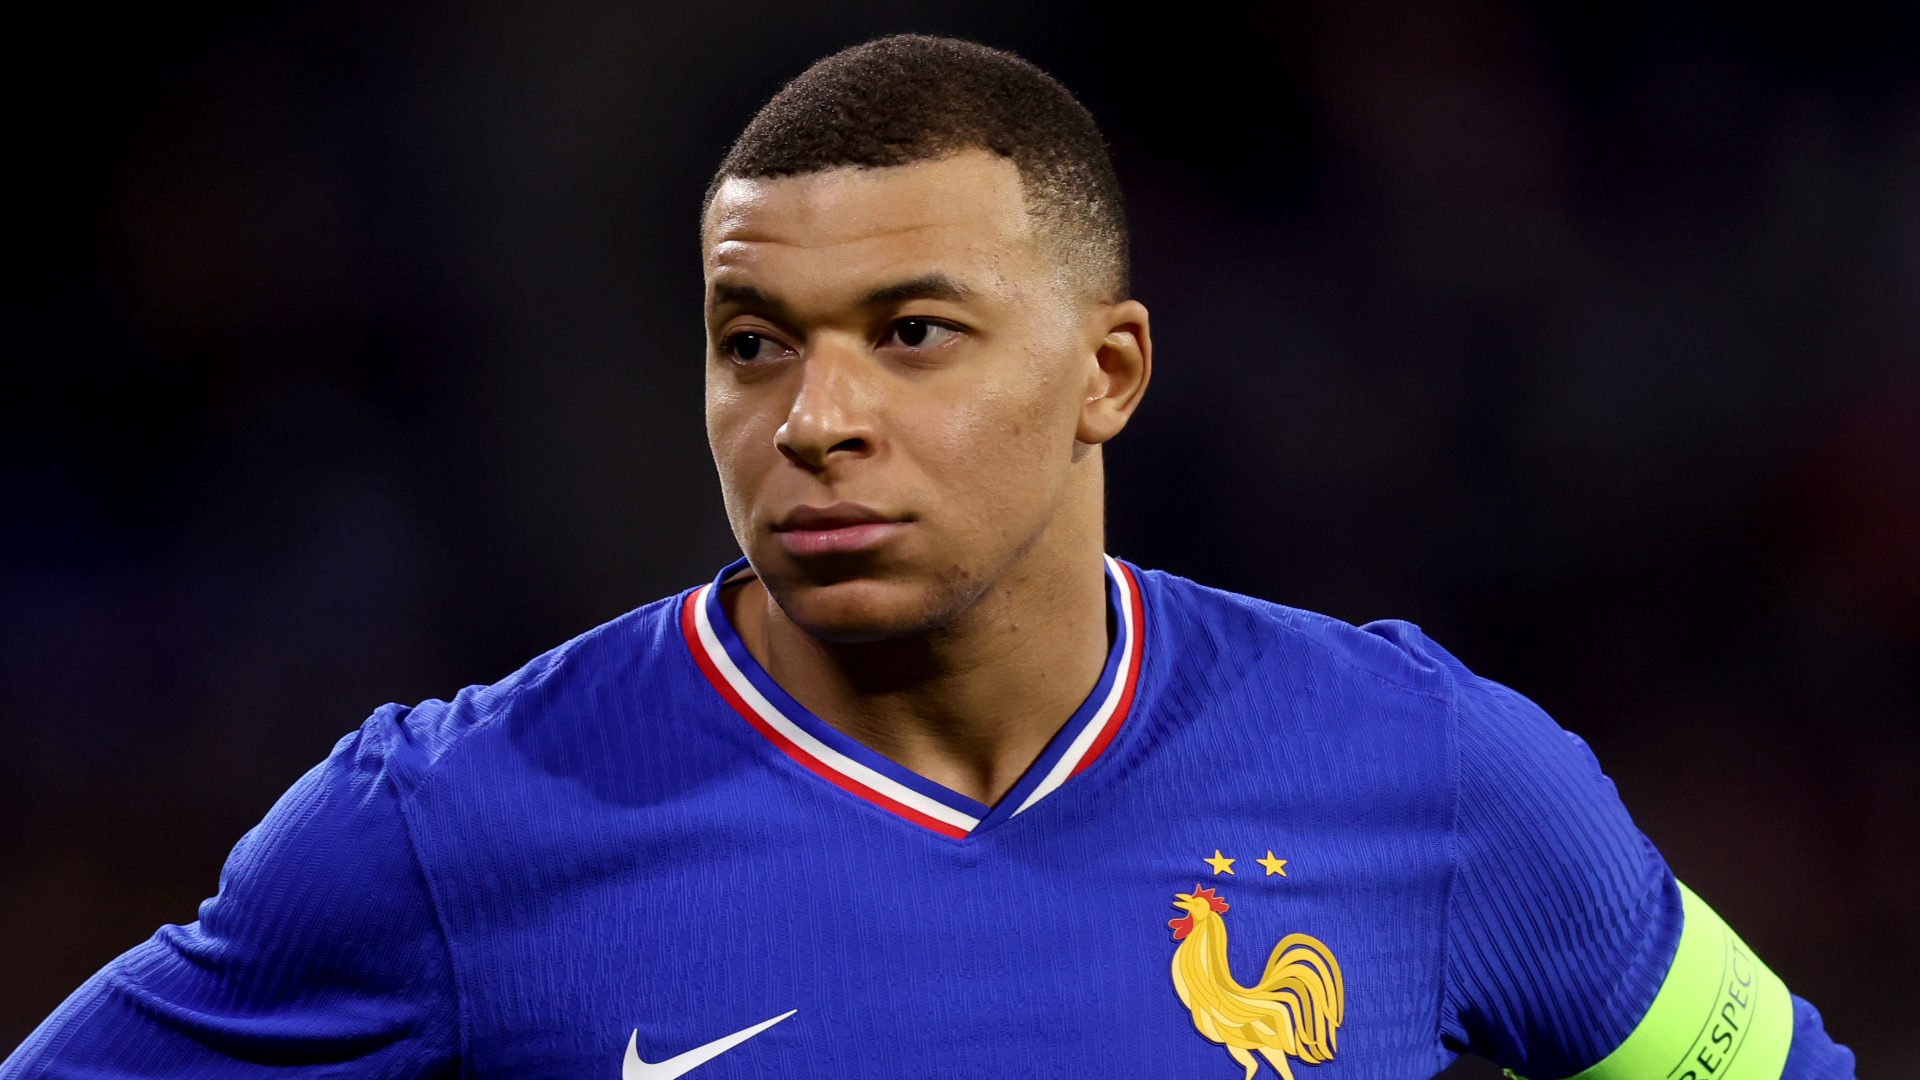 'Embarrassing' - Kylian Mbappe slammed for 'lousy' France performances as PSG forward is accused of 'not even moving' against Germany and Chile